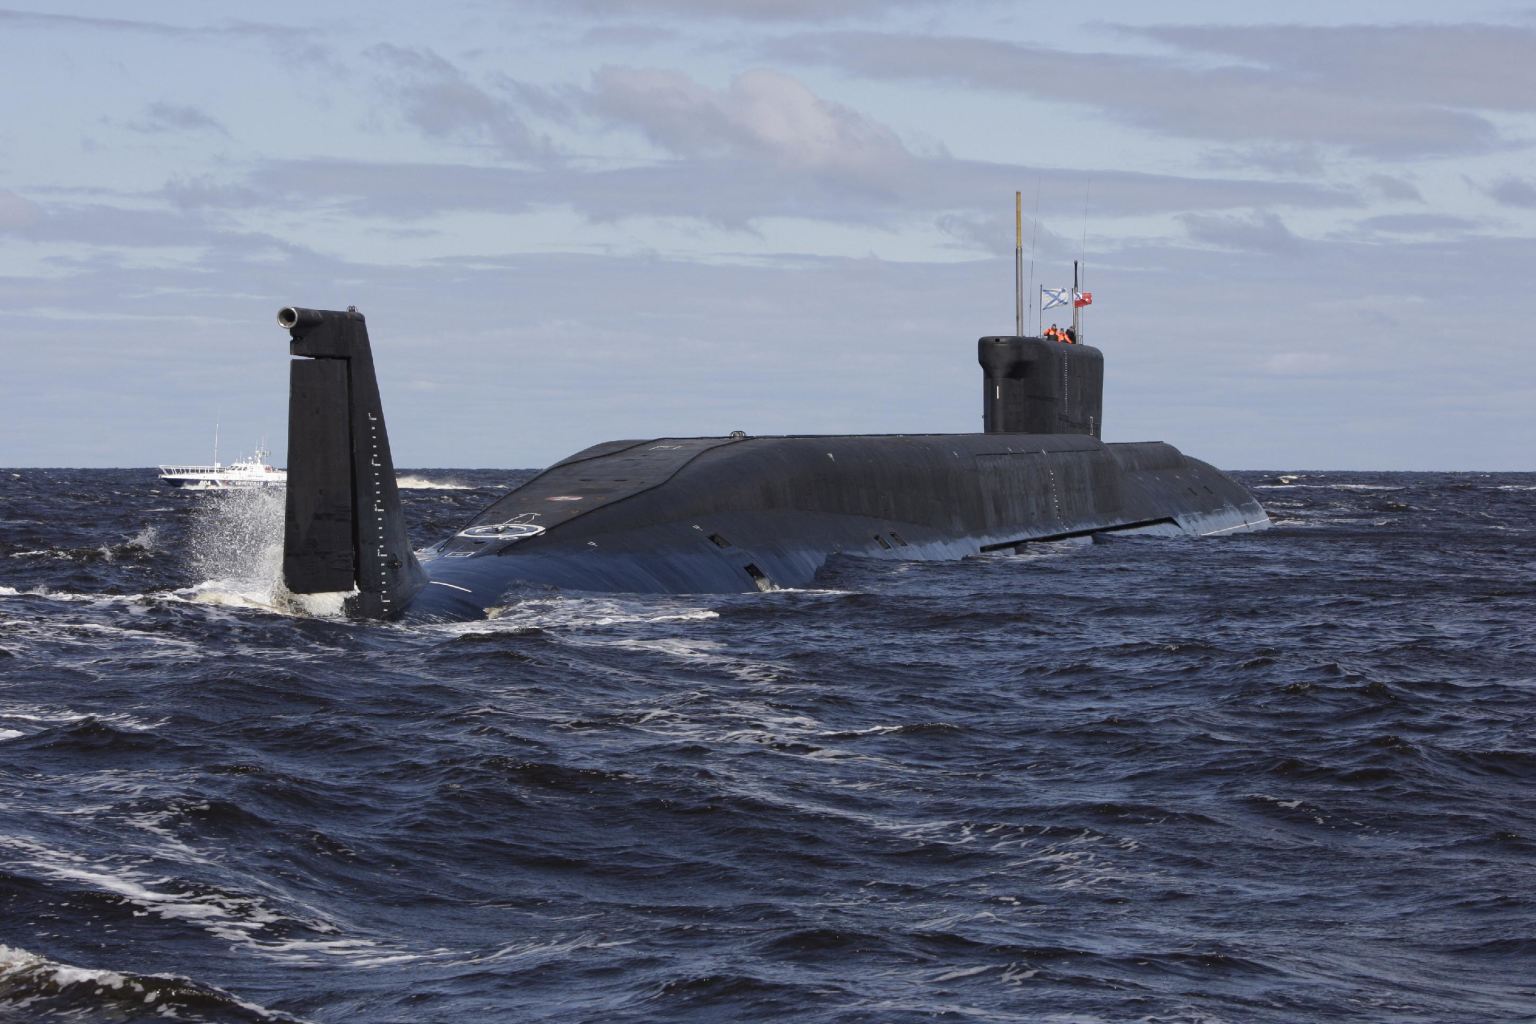 New Russian nuclear submarine enters service 96868a94380b3601260f6a706700c710